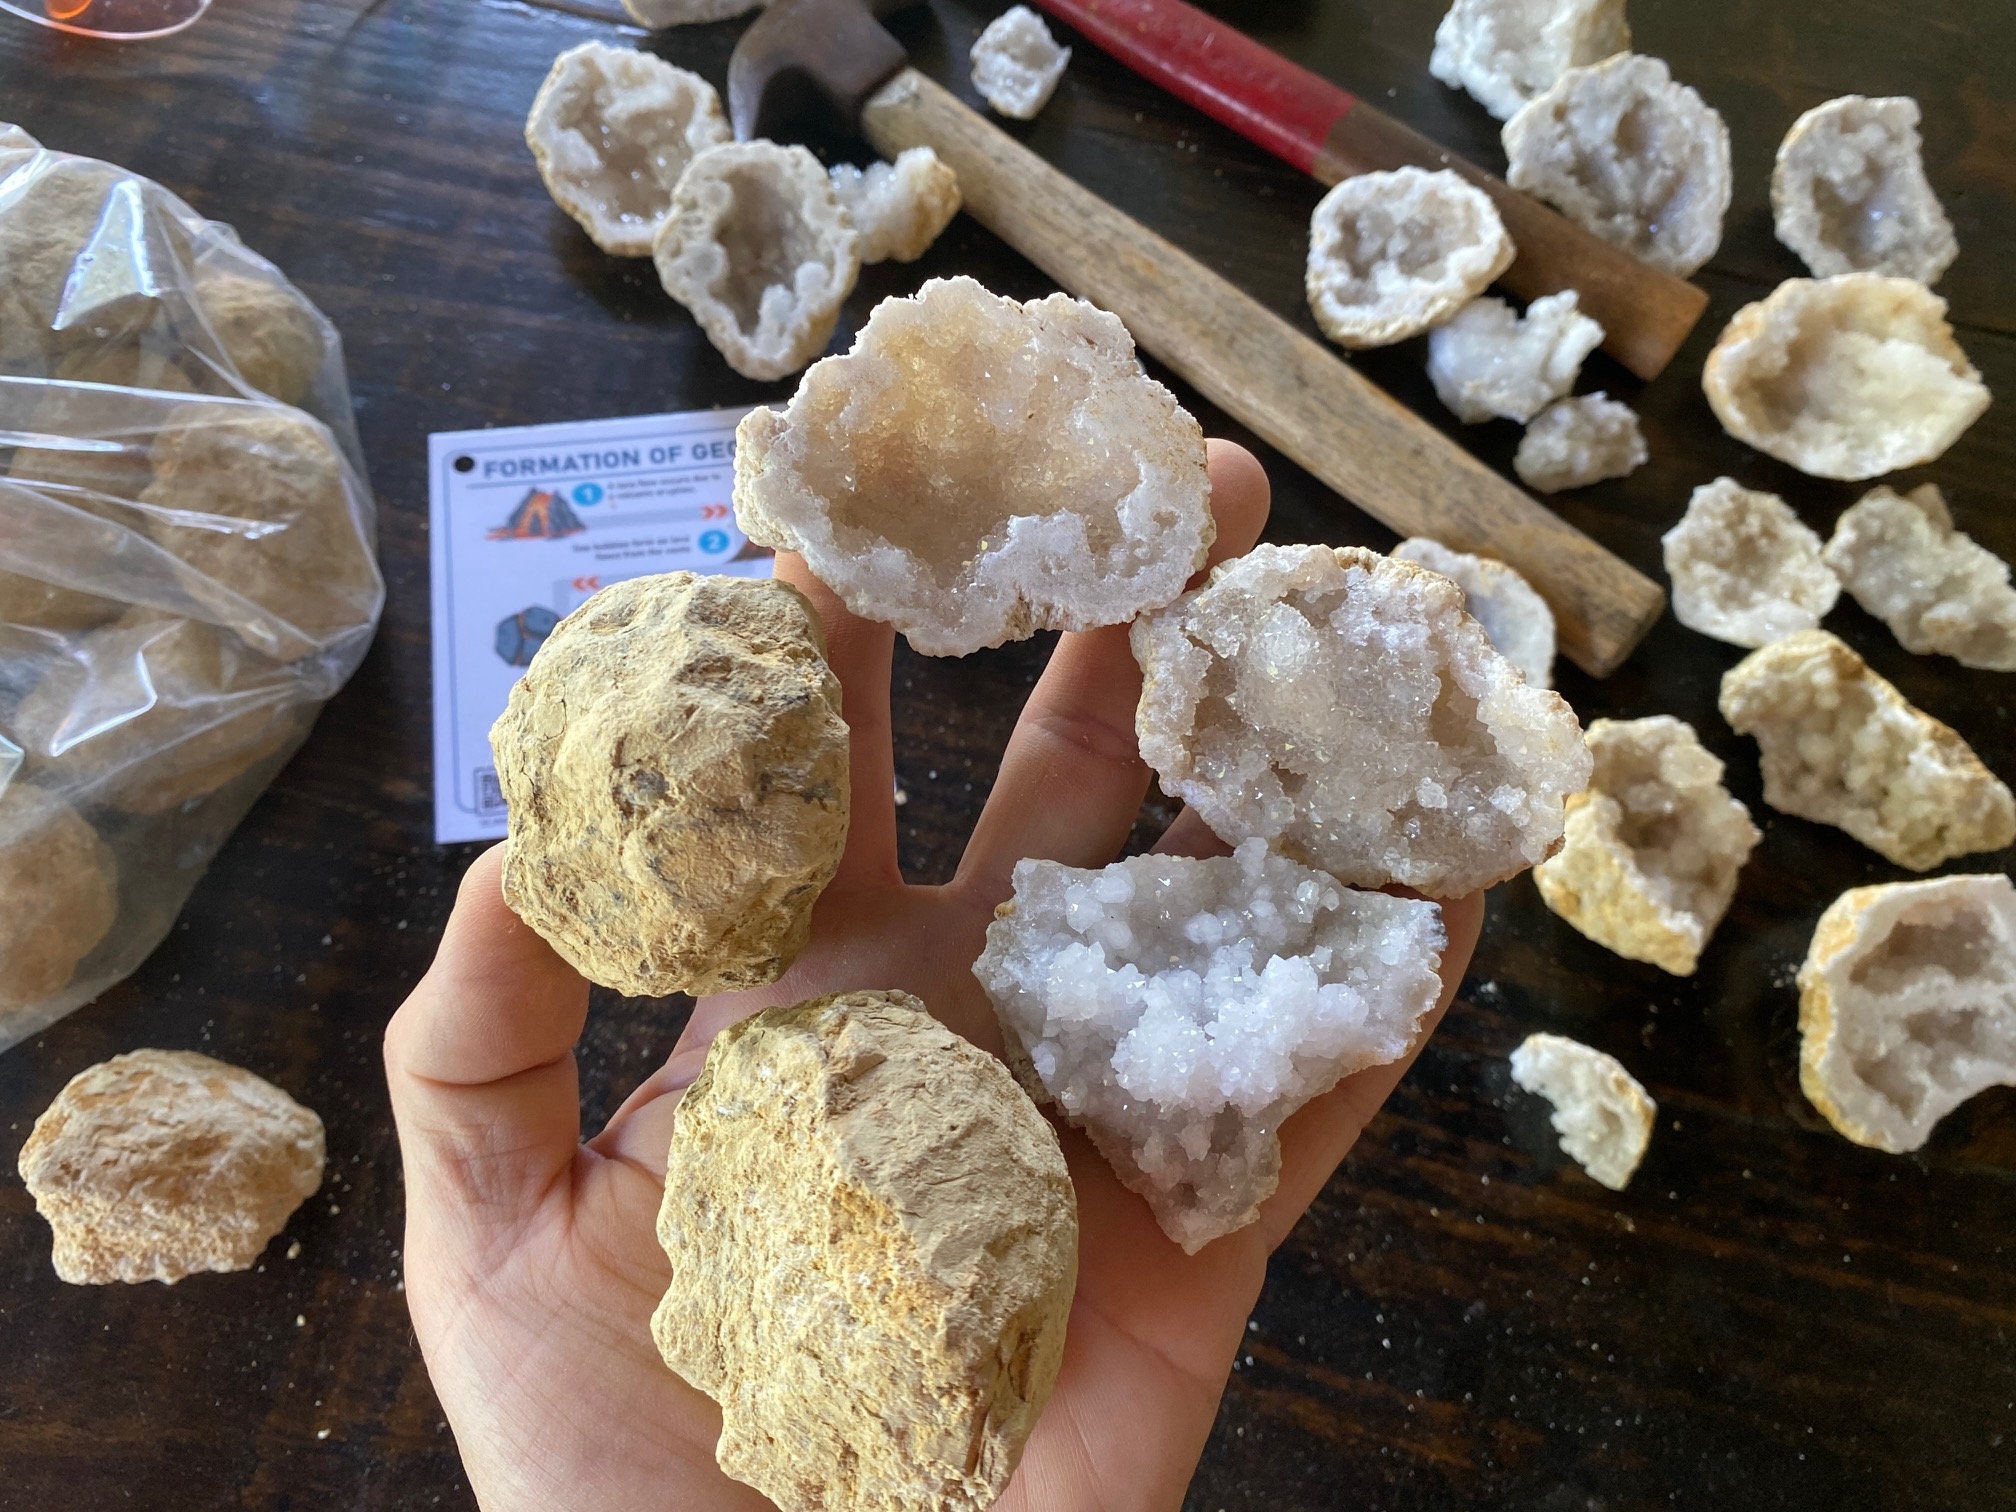 I got a geode opened at our local Texas gem and mineral show. The